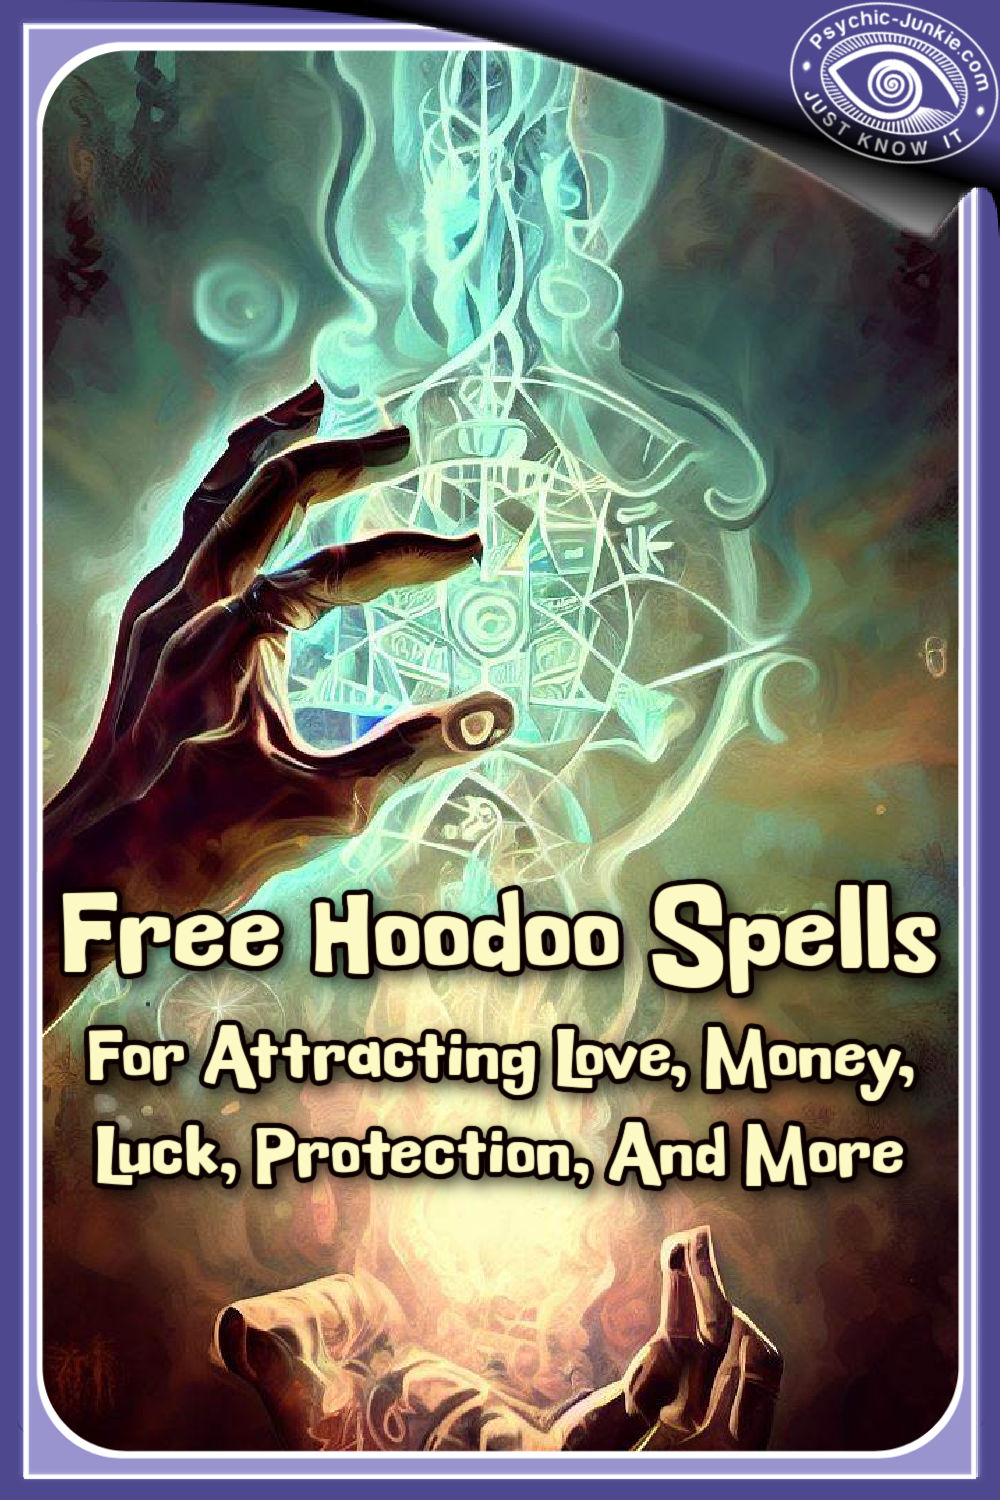 Free Hoodoo Spells For Attracting Love, Money, Luck, Protection, And More